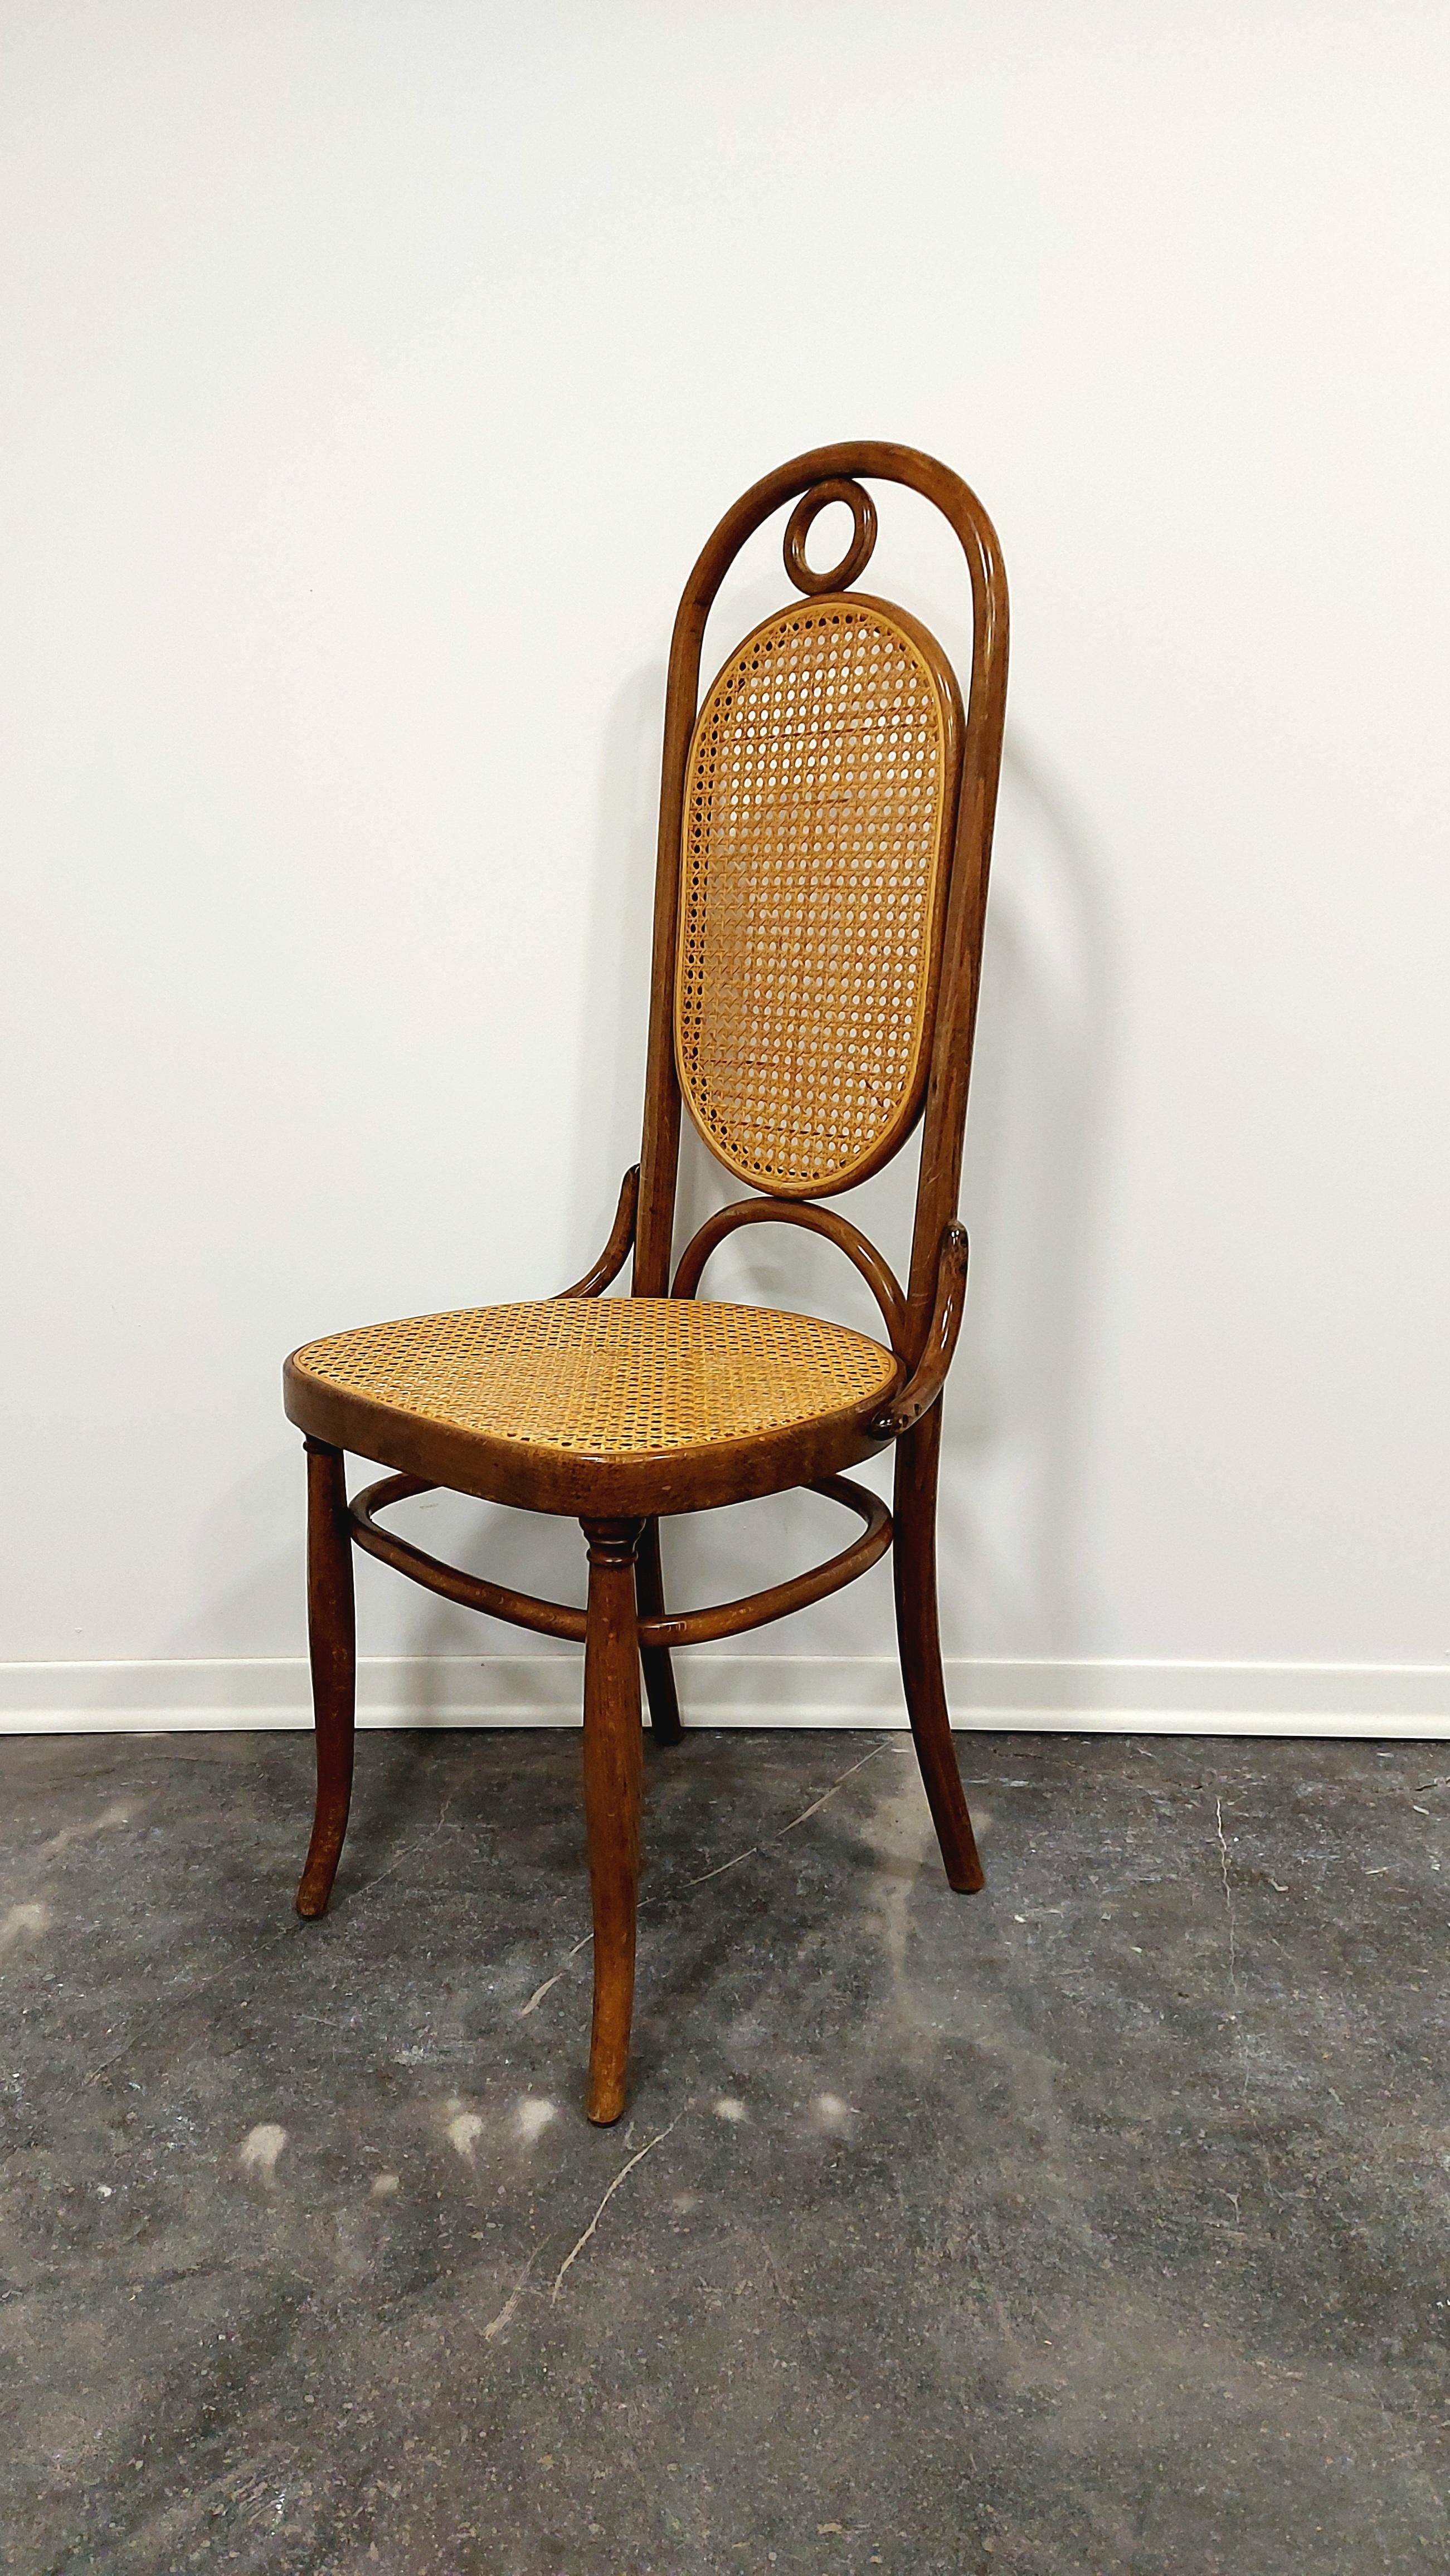 Mid-Century Modern Dining Chairs, Bentwood, M 17, High Back, 1 of 6 For Sale